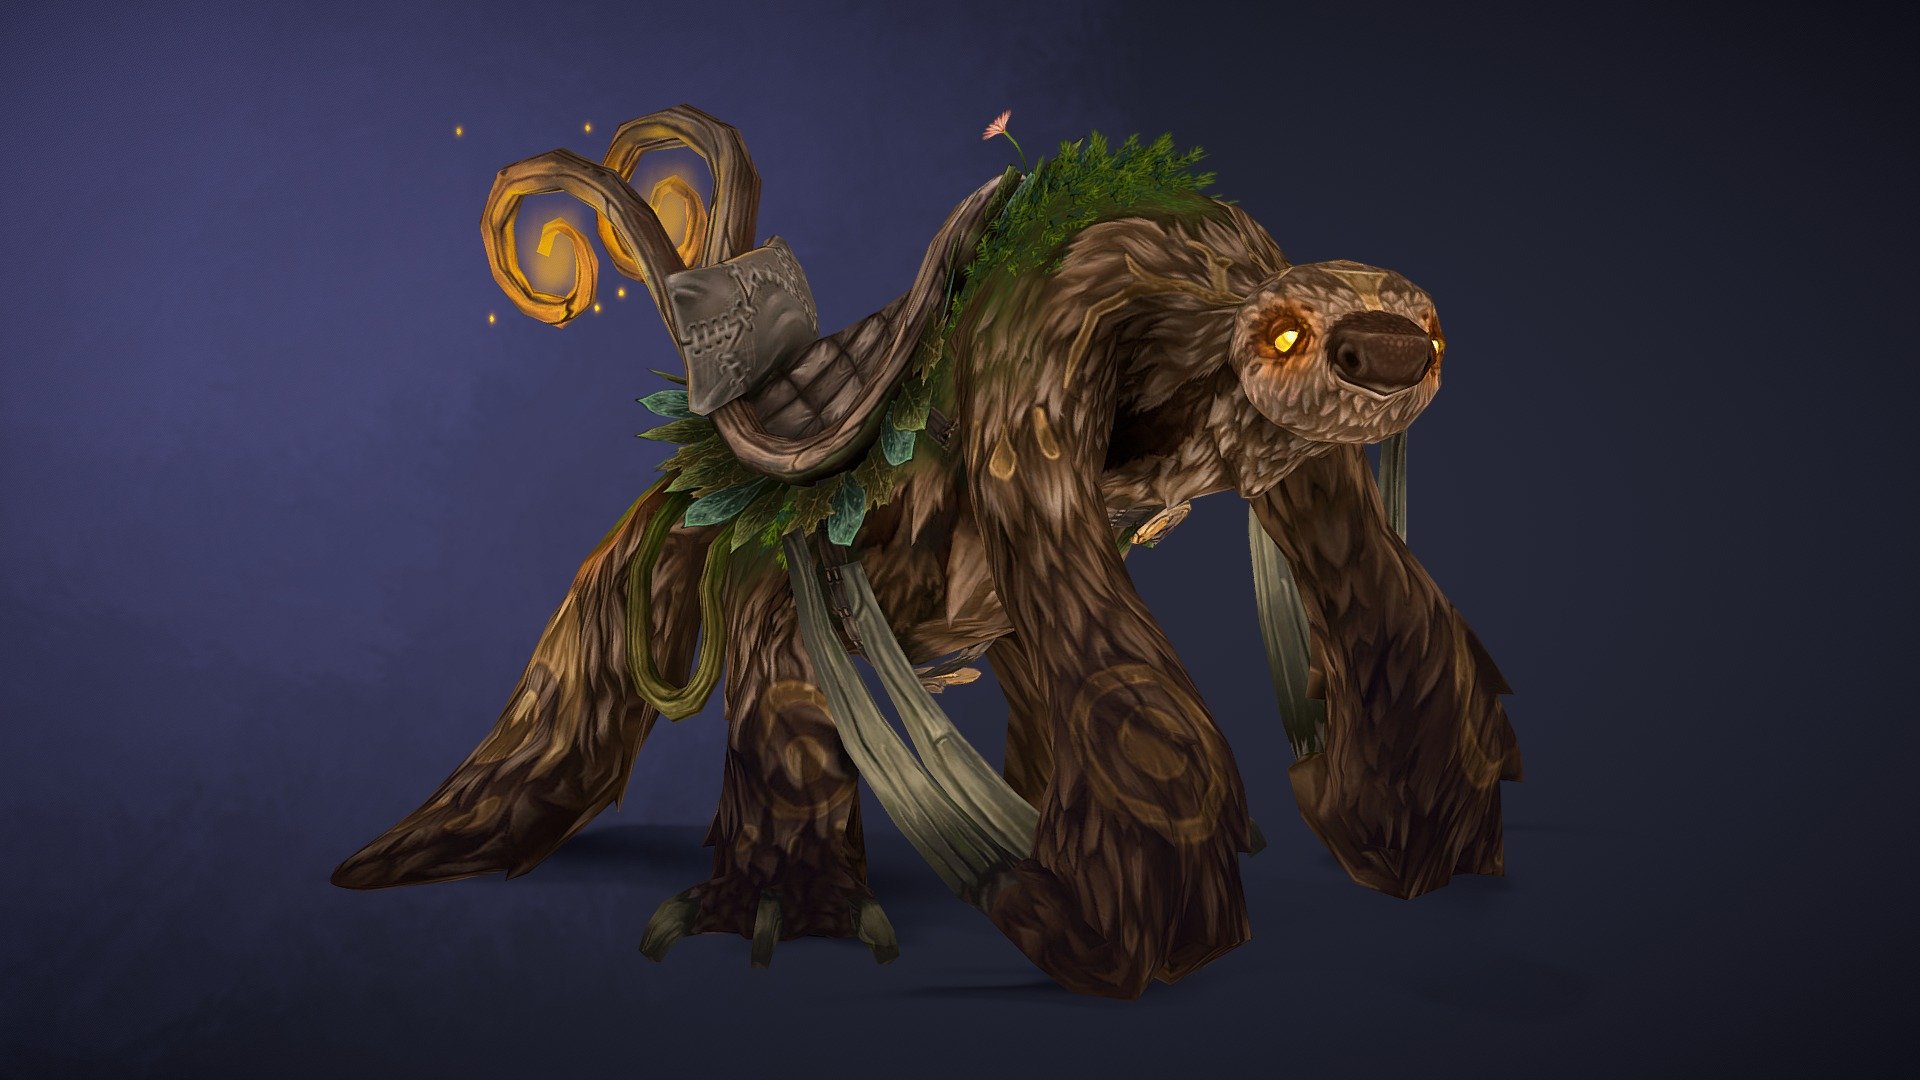 Deep within the jungles of Azeroth, lives the animal called the Dozer. This drowsy creature is revered by druids for their ability to remain in the Emerald Dream even while in the heat battle. However, some speculate they are instead druids, who have followed the path of the Sloth and have become to lazy to revert back to their original forms.

In this project I wanted to make a creature and mount that could exist in the universe of World of Warcraft. I wanted to be as accurate to in game models and aimed have it share the same poly count as well as texture resolution as models in game. I was inspired to make this based on Ashleigh Warner's creation of the pet, &ldquo;Daisy the Sloth